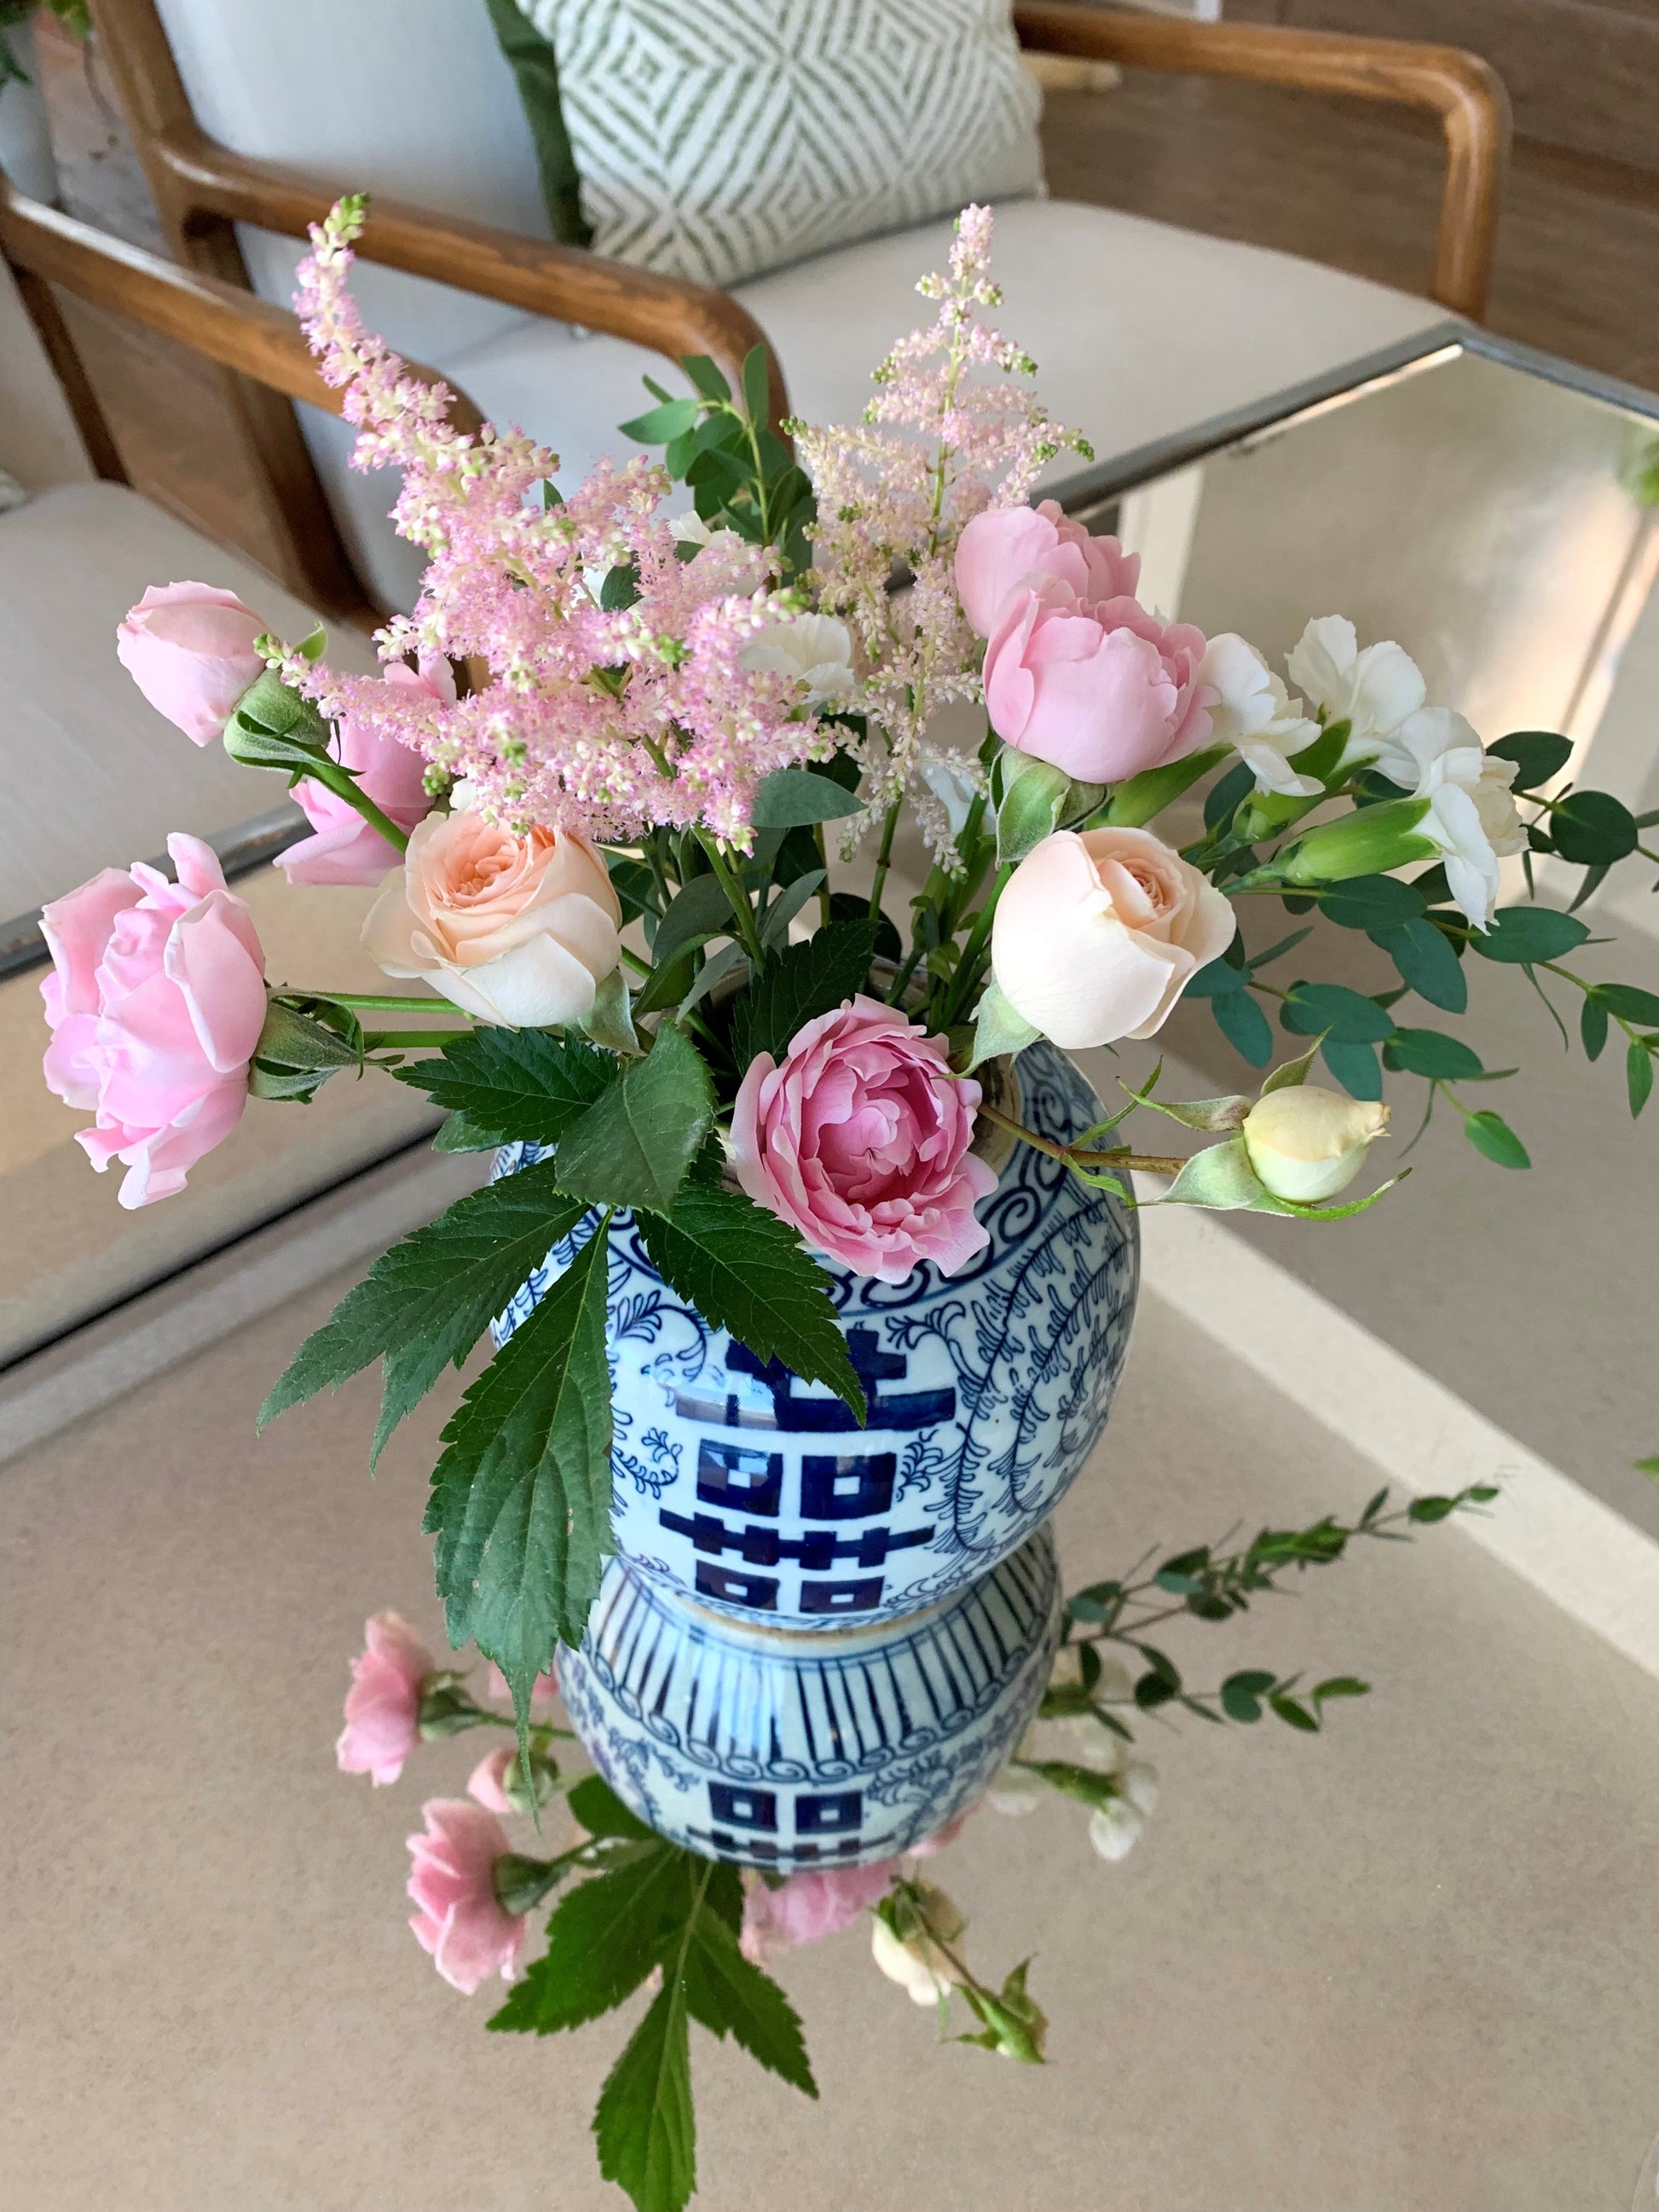 A medium double happiness ginger jar filled with pink flowers on a coffee table.